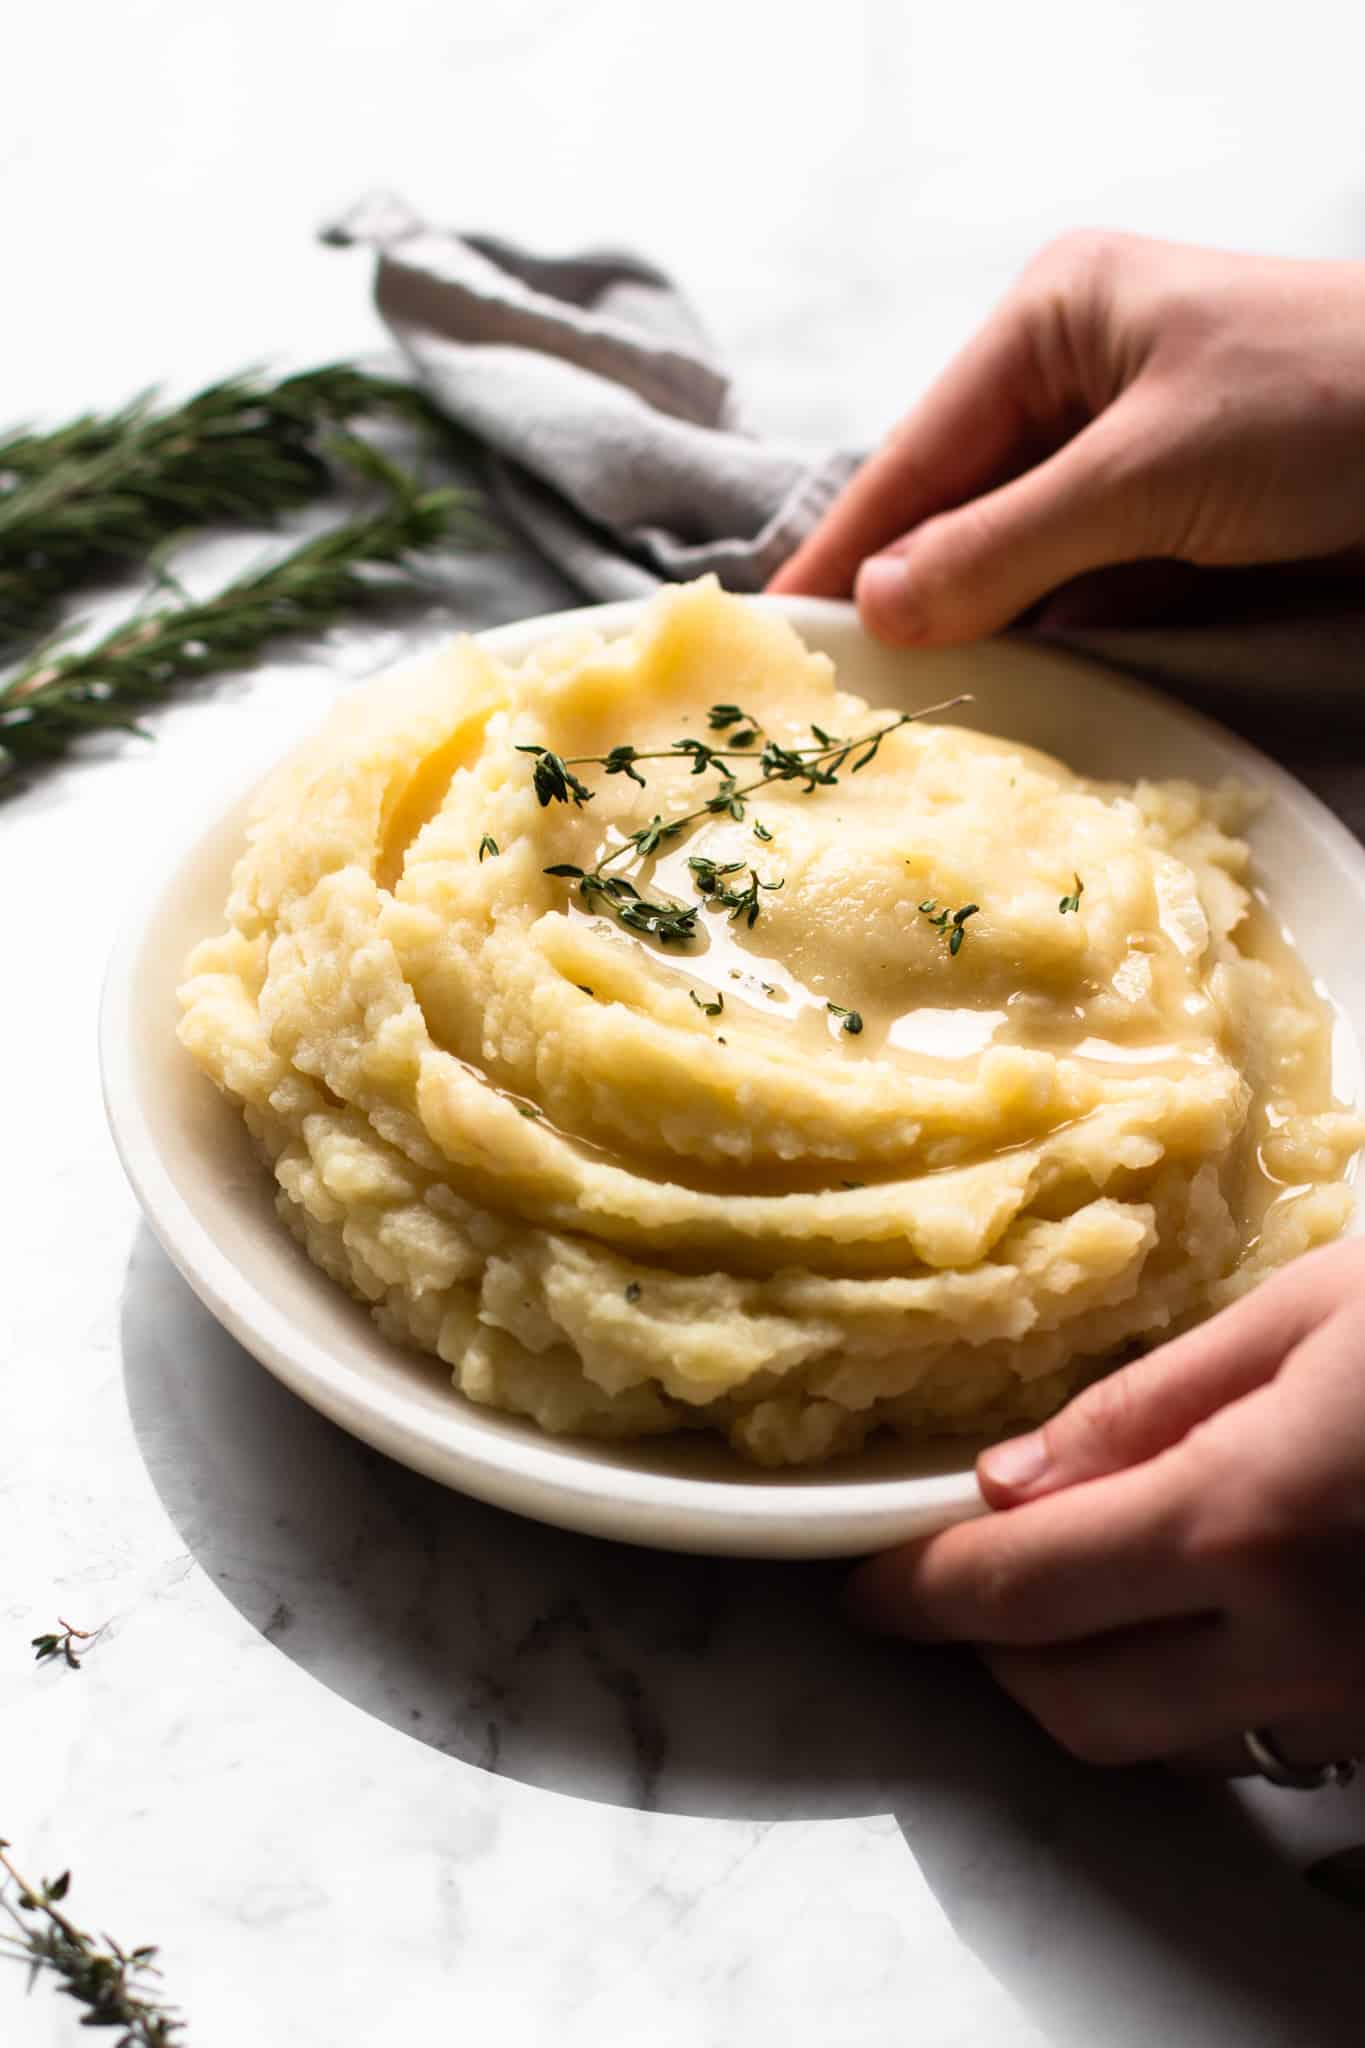 Instant Pot mashed potatoes from our vegan Christmas menu